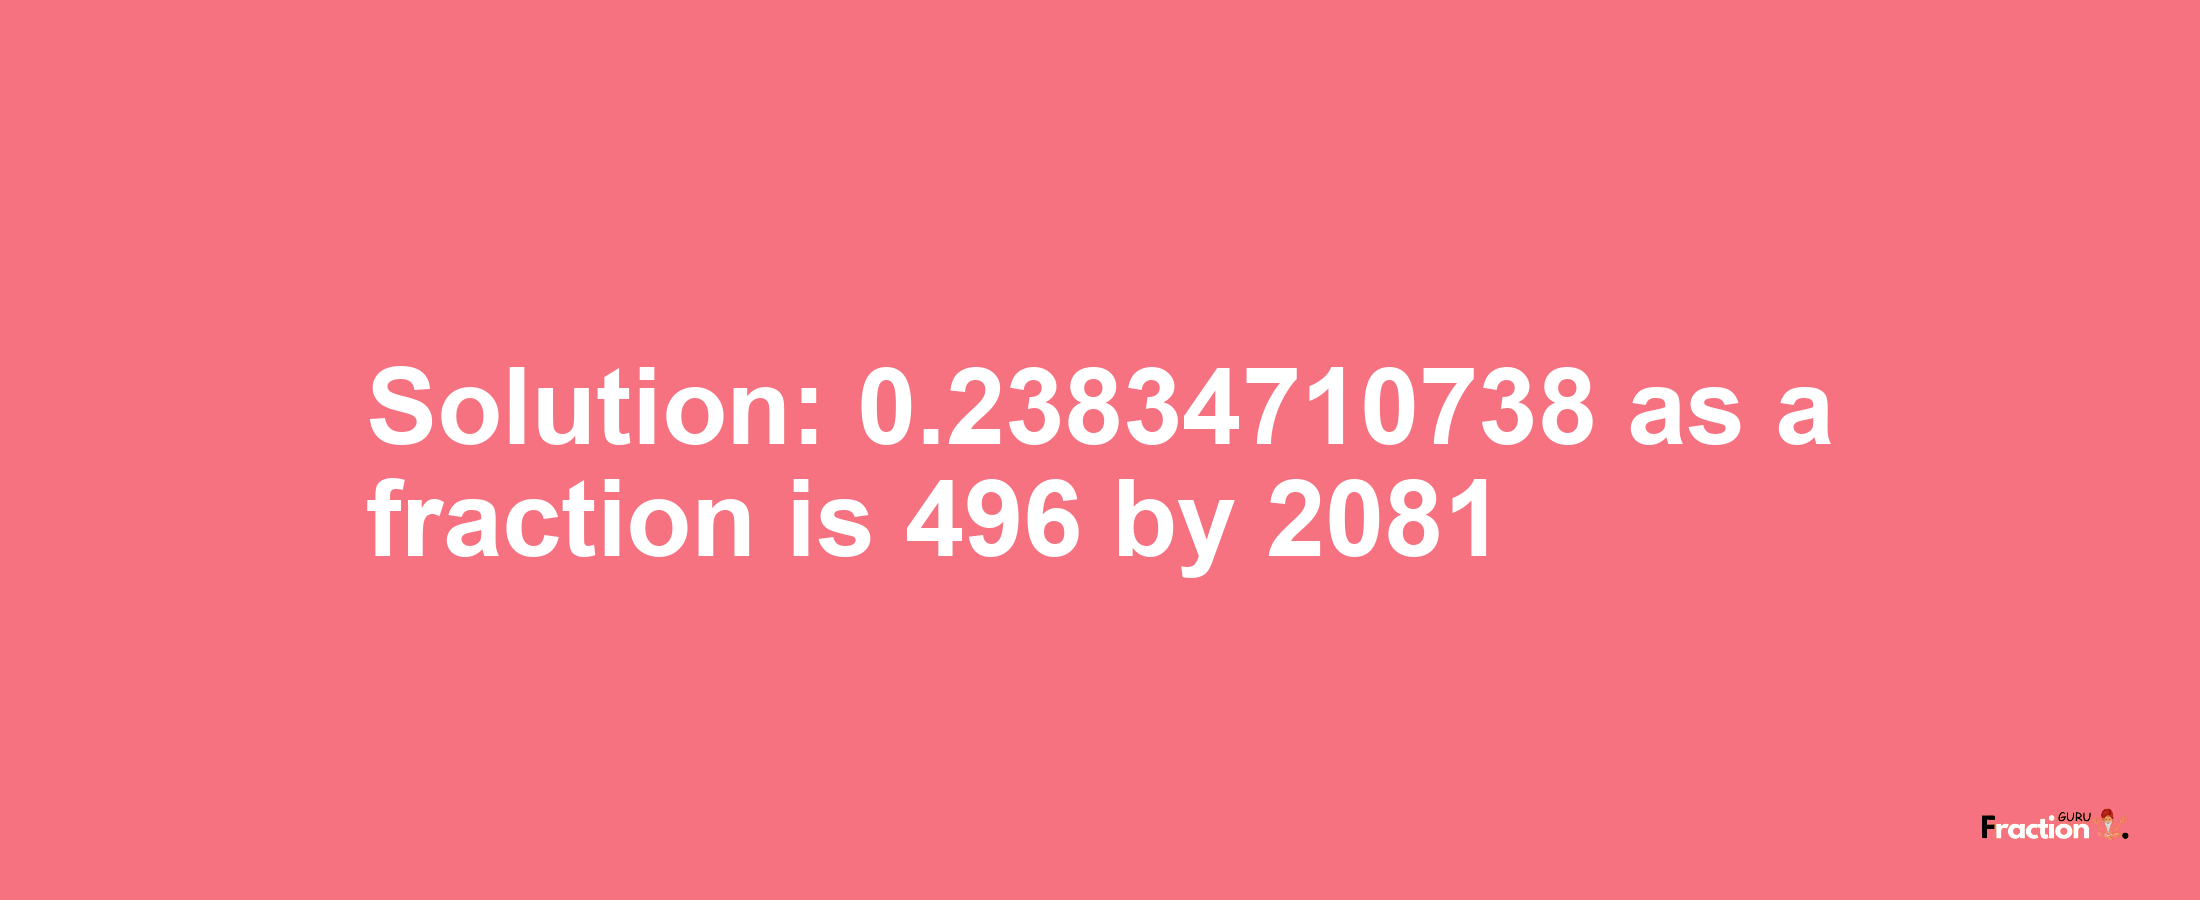 Solution:0.23834710738 as a fraction is 496/2081